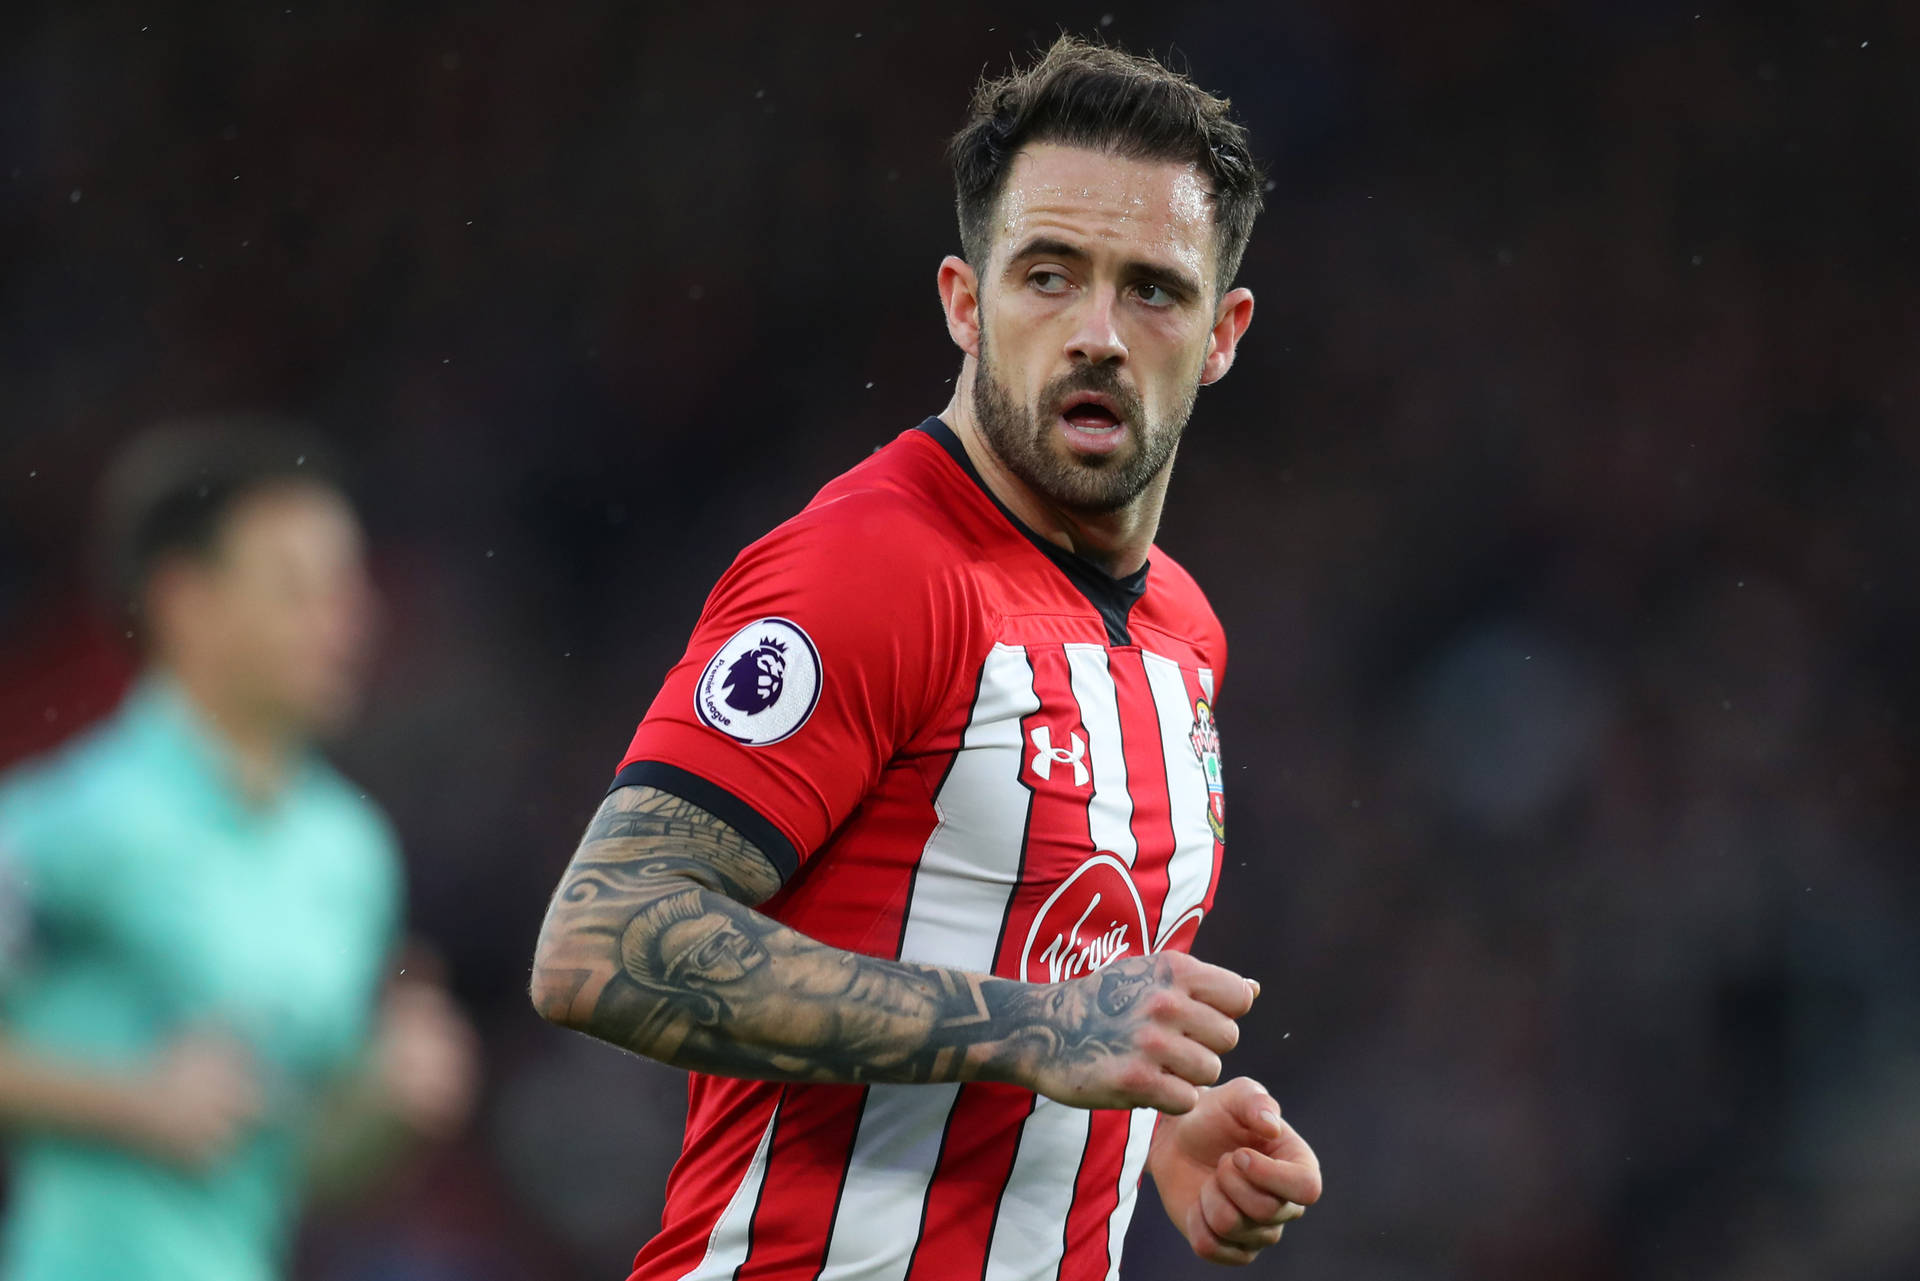 Dannyings Tittar Tillbaka - It Could Be A Wallpaper Featuring Danny Ings Looking Back Or Reminiscing. Wallpaper